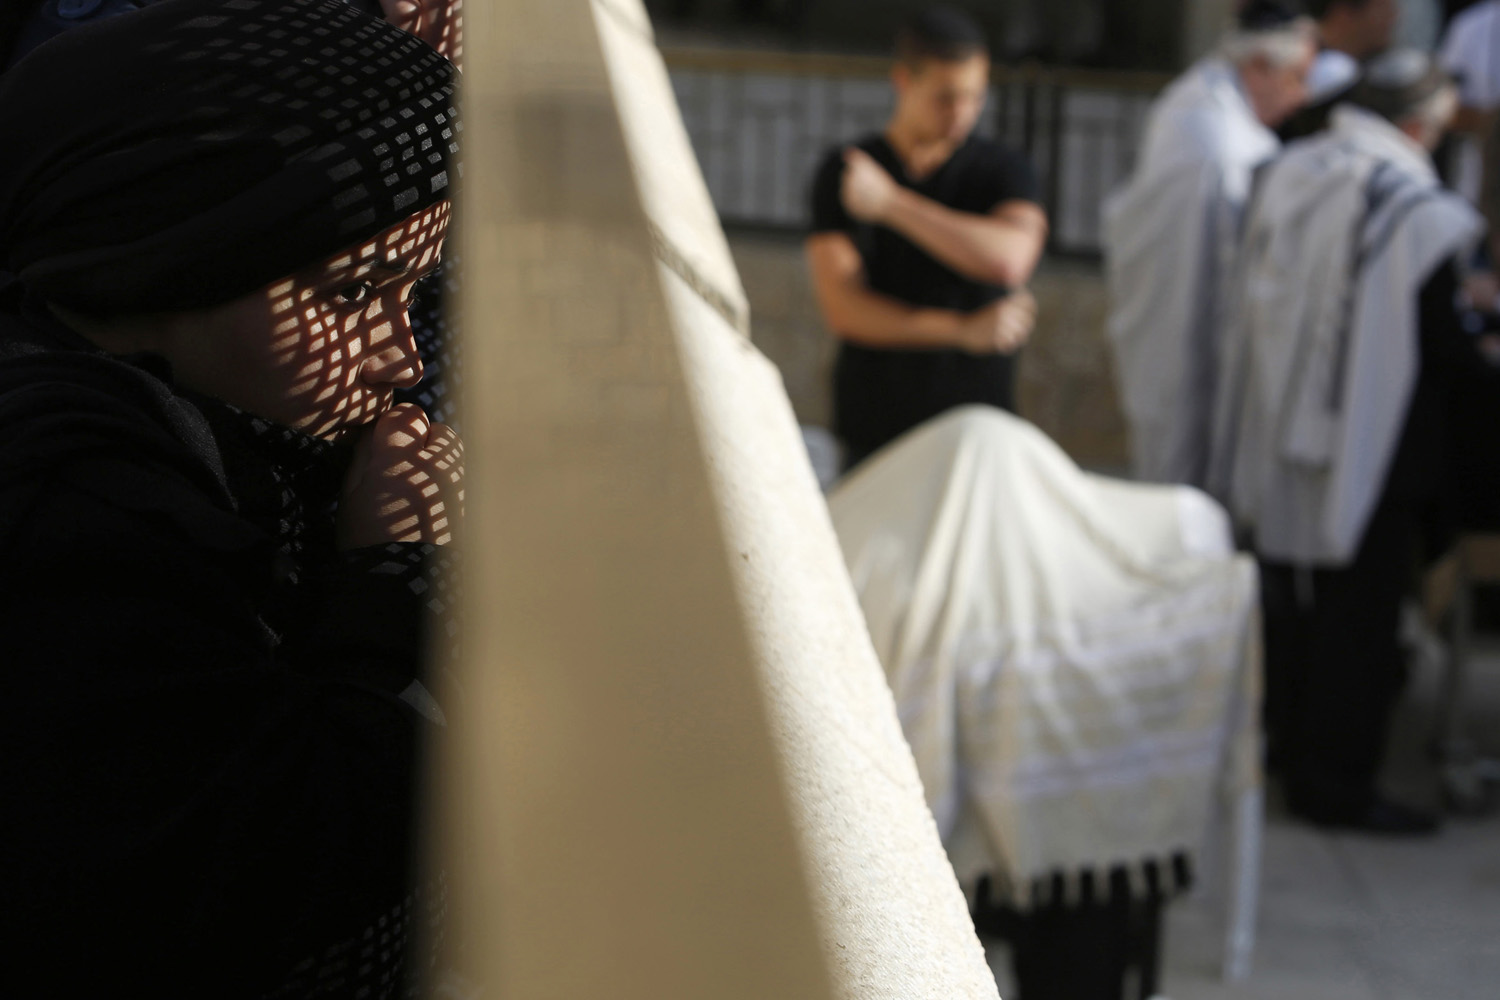 A woman looks at men praying from behind a metal screen at the Western Wall Judaism's holiest prayer site, in Jerusalem's Old City